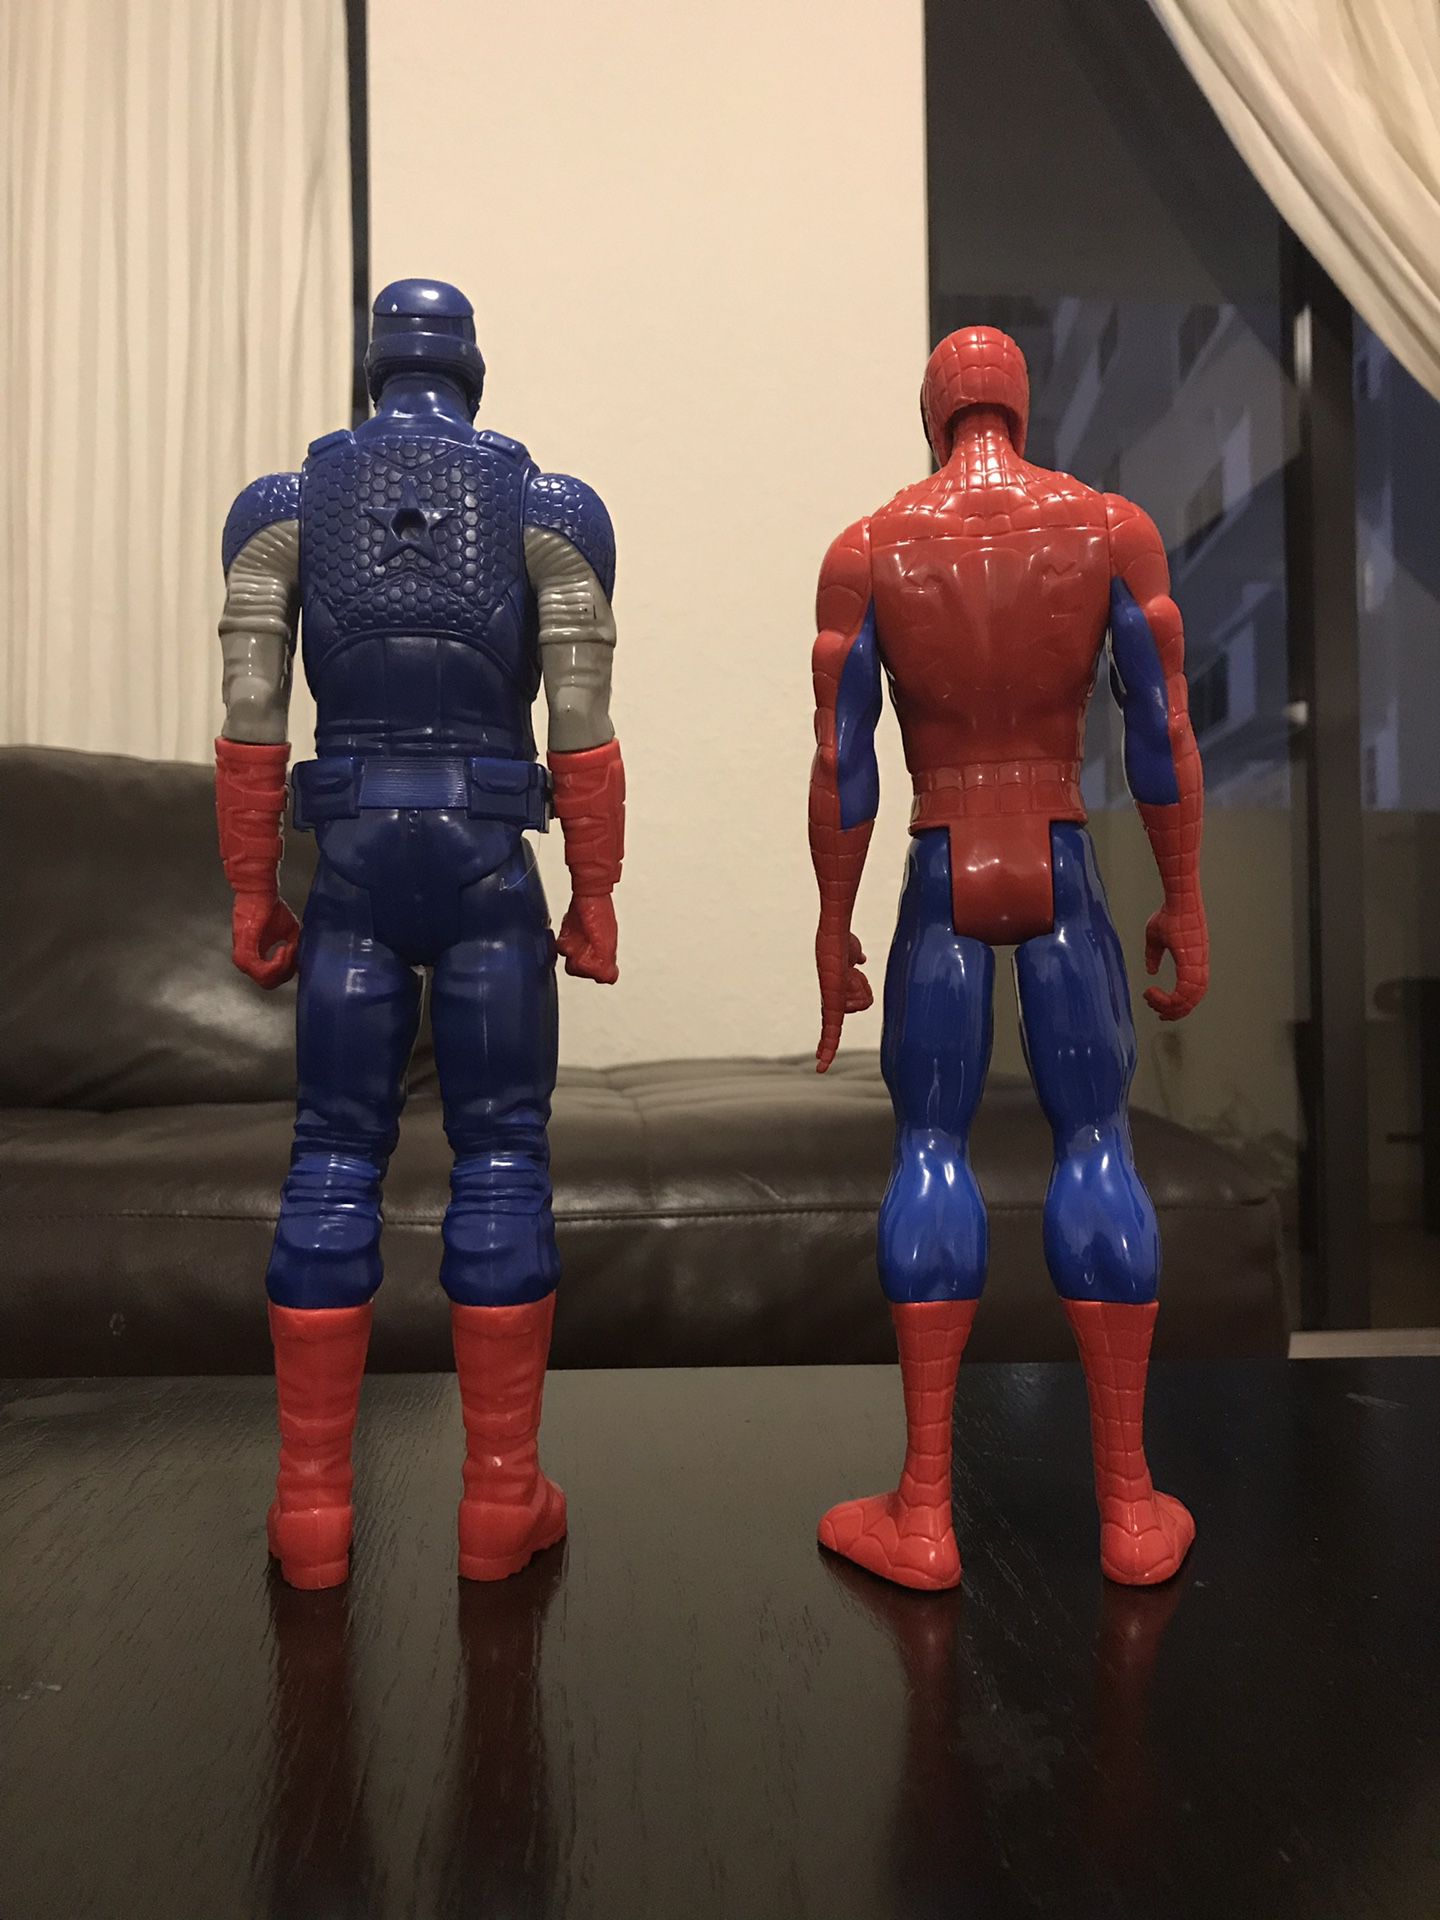 Spiderman and Captain America (MARVEL)